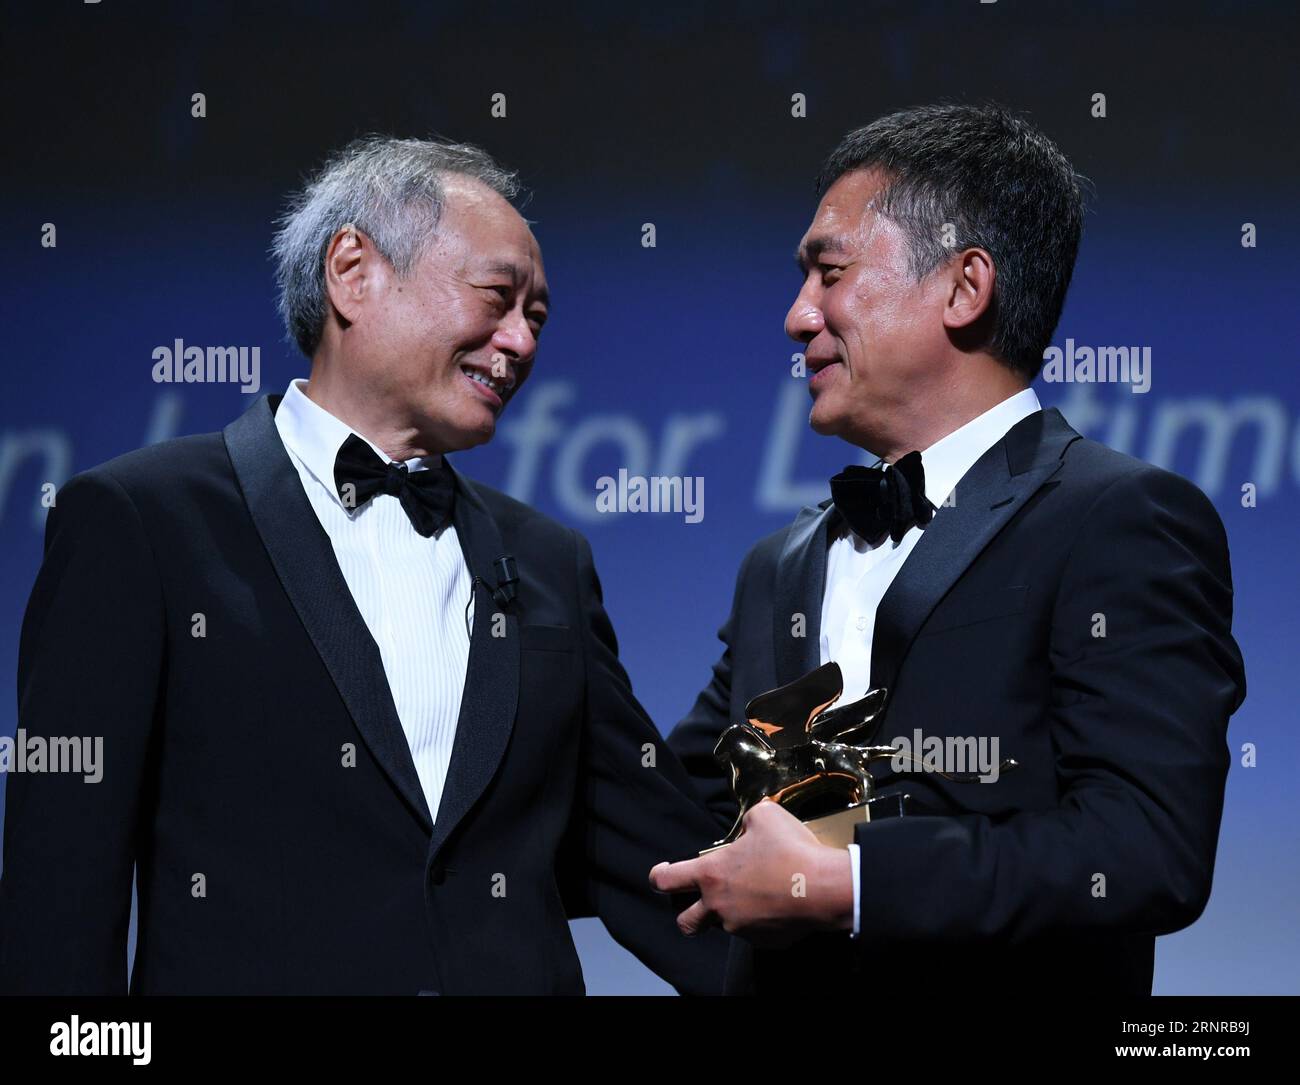 Venice, Italy. 2nd Sep, 2023. Director Ang Lee (L) and Actor Tony Leung Chiu-Wai attend an award ceremony during the 80th Venice International Film Festival in Venice, Italy, on Sept. 2, 2023. Tony Leung Chiu-Wai of Hong Kong, China was presented with the Golden Lion for Lifetime Achievement during the event on Saturday. Credit: Jin Mamengni/Xinhua/Alamy Live News Stock Photo